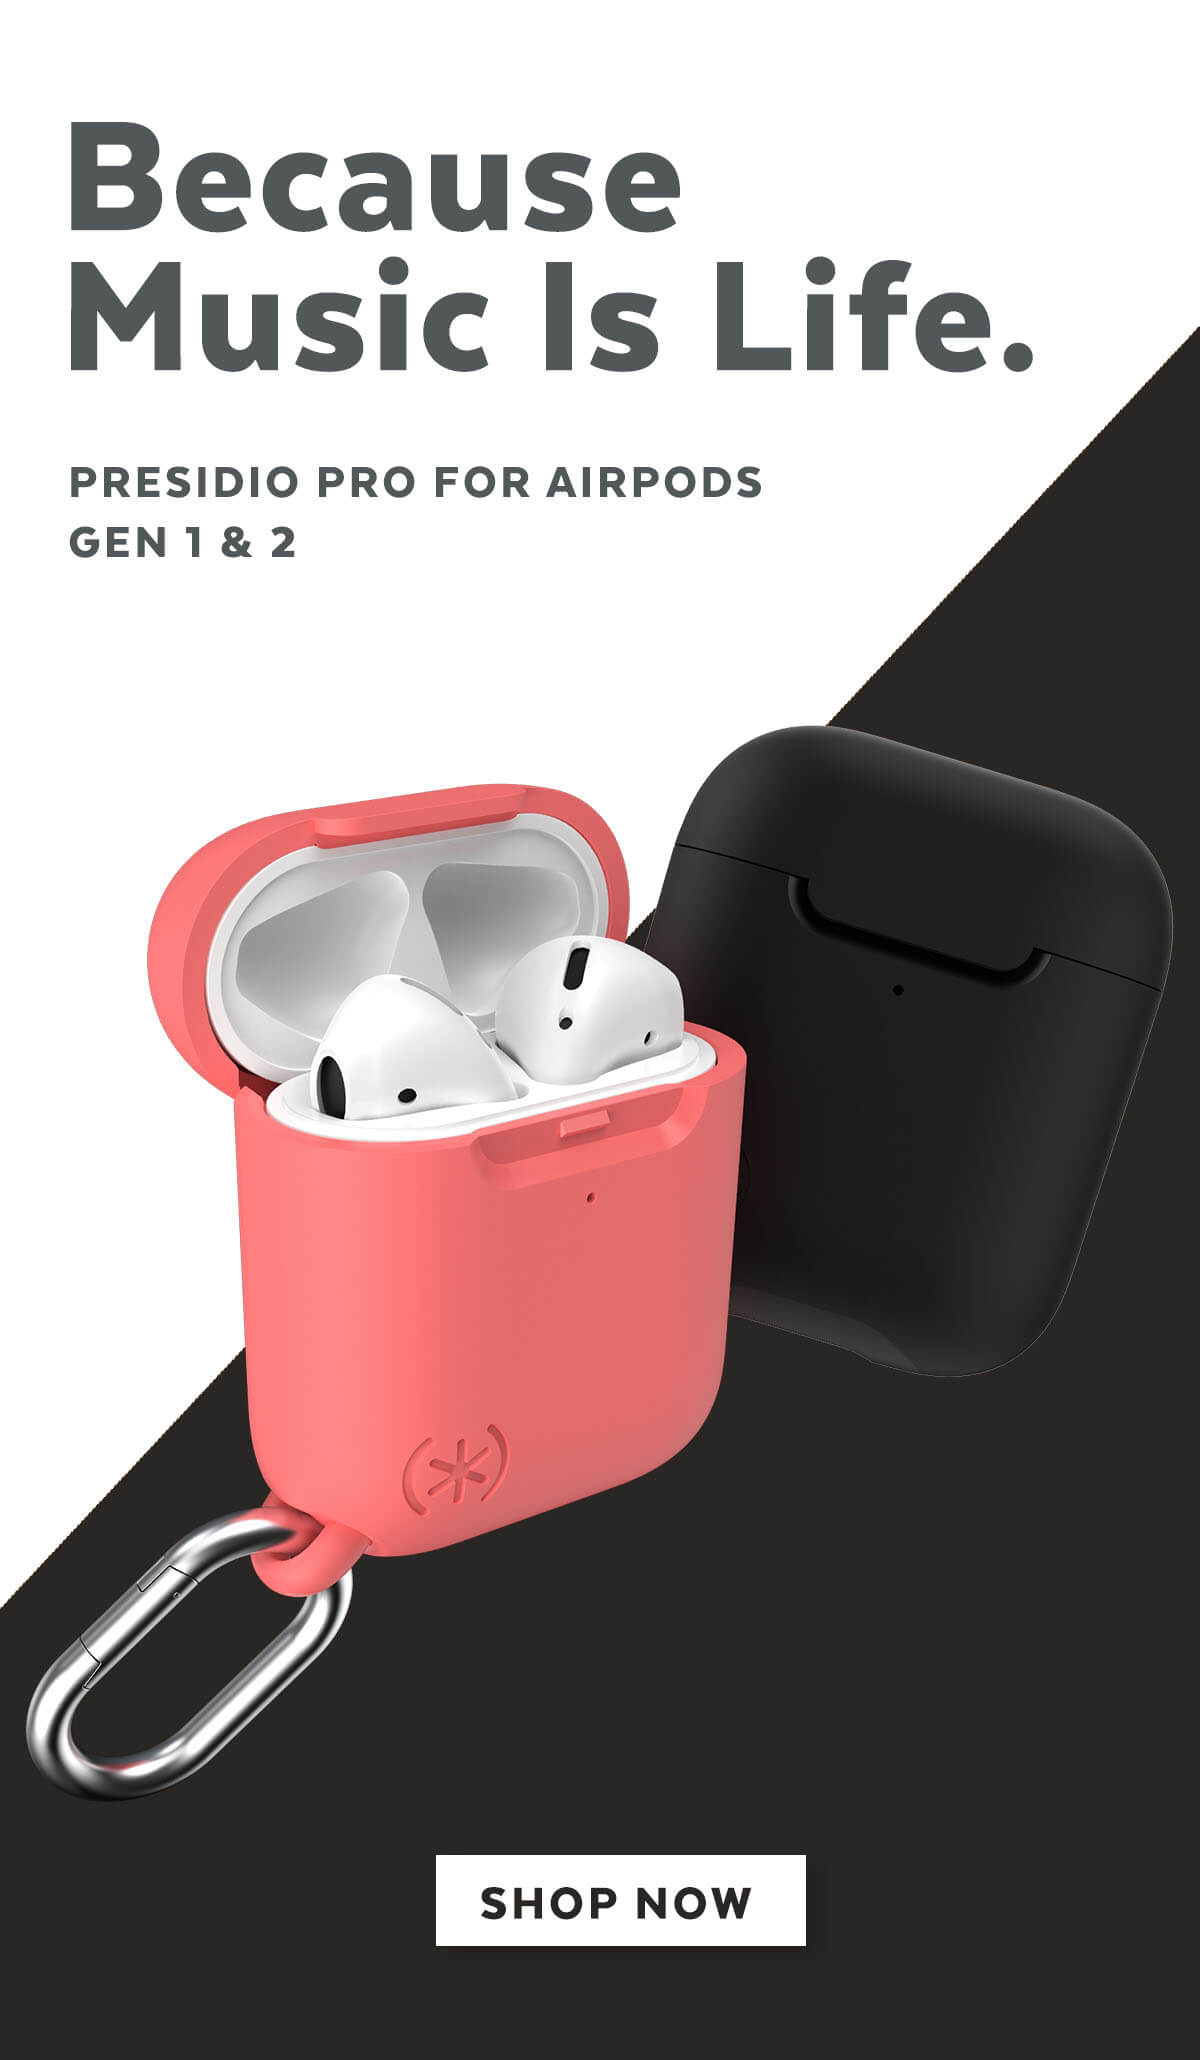 Because music is life. Presidio Pro for AirPods Gen 1 & 2. Shop now